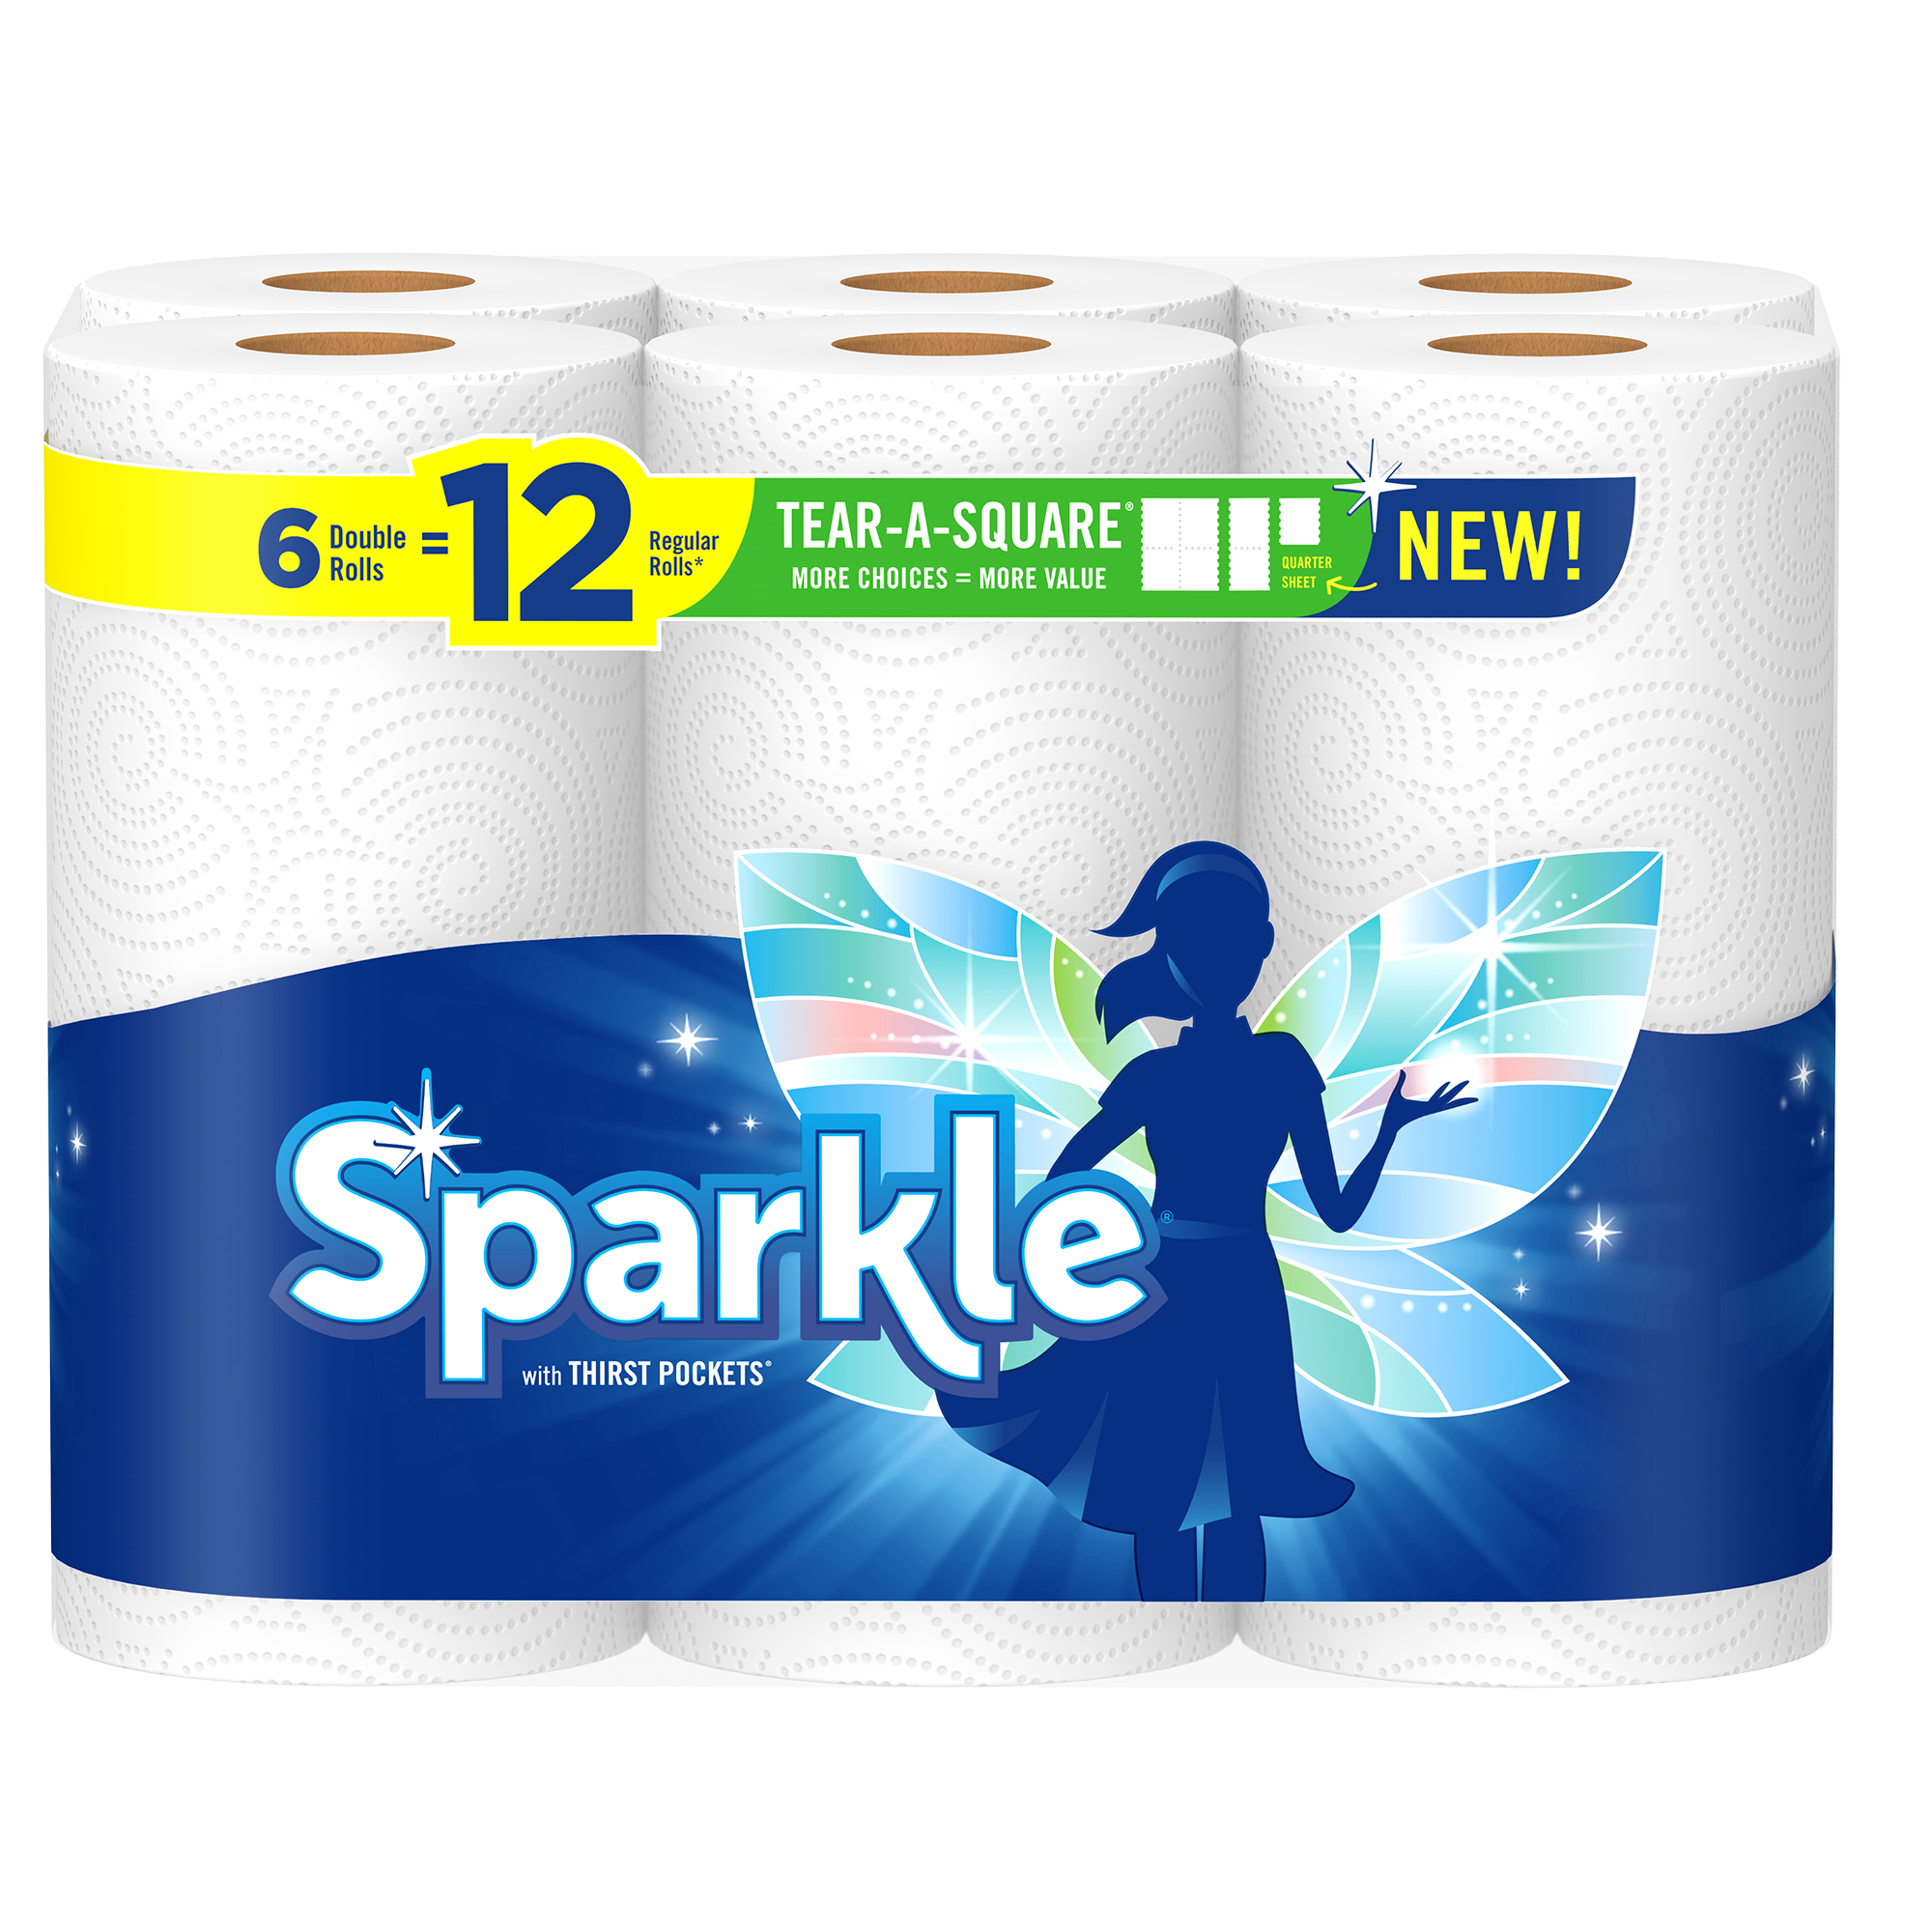 Sparkle Tear-A-Square package.